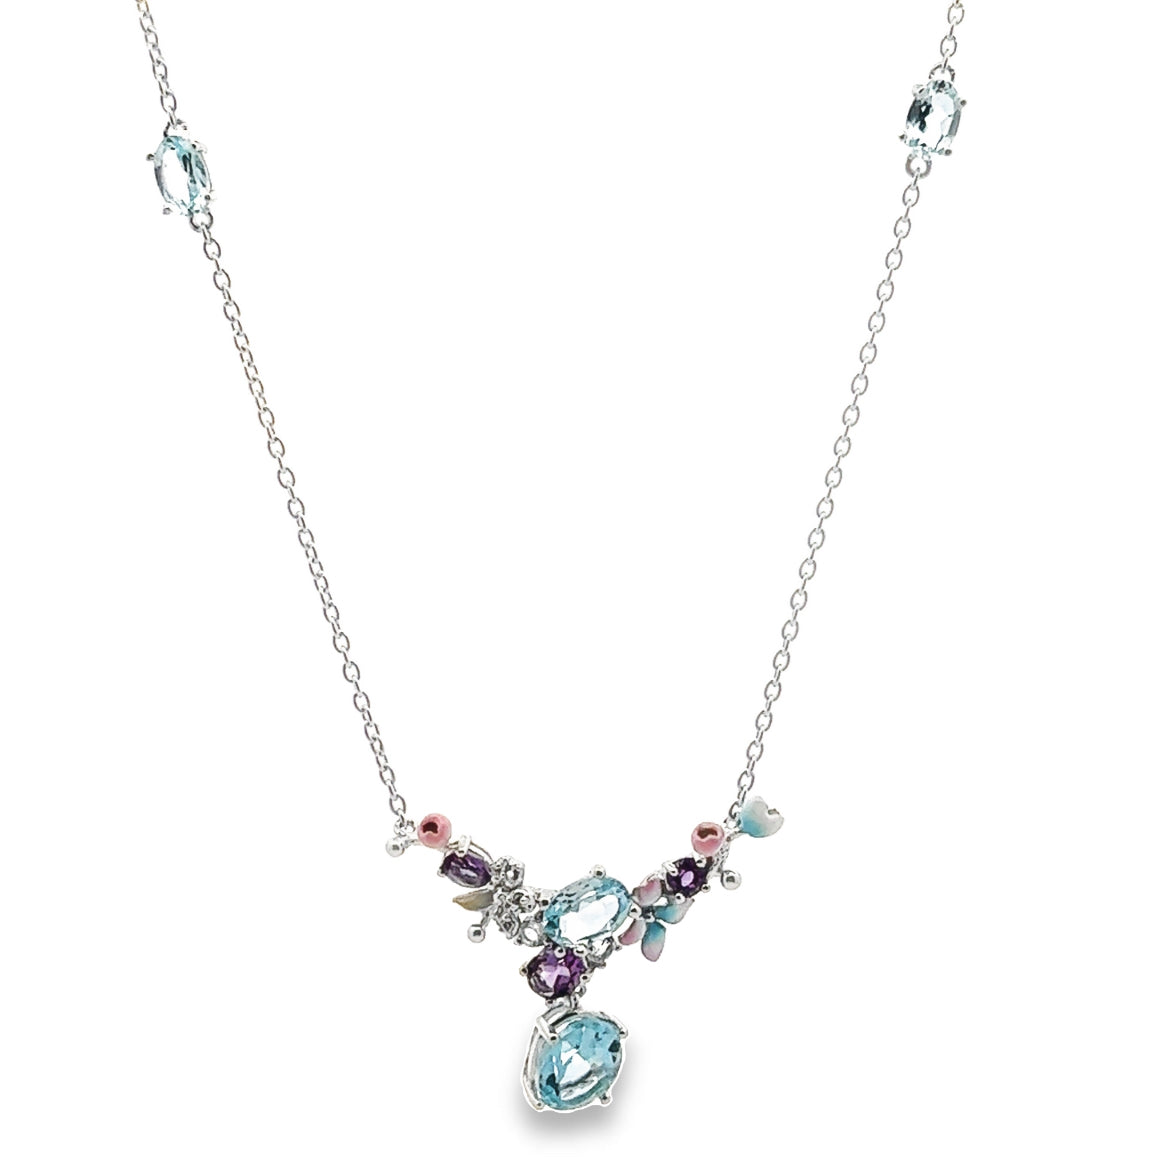 925 SILVER PLATED NECKLACE WITH BLUE TOPAZ AMETHYST AND WHITE TOPAZ